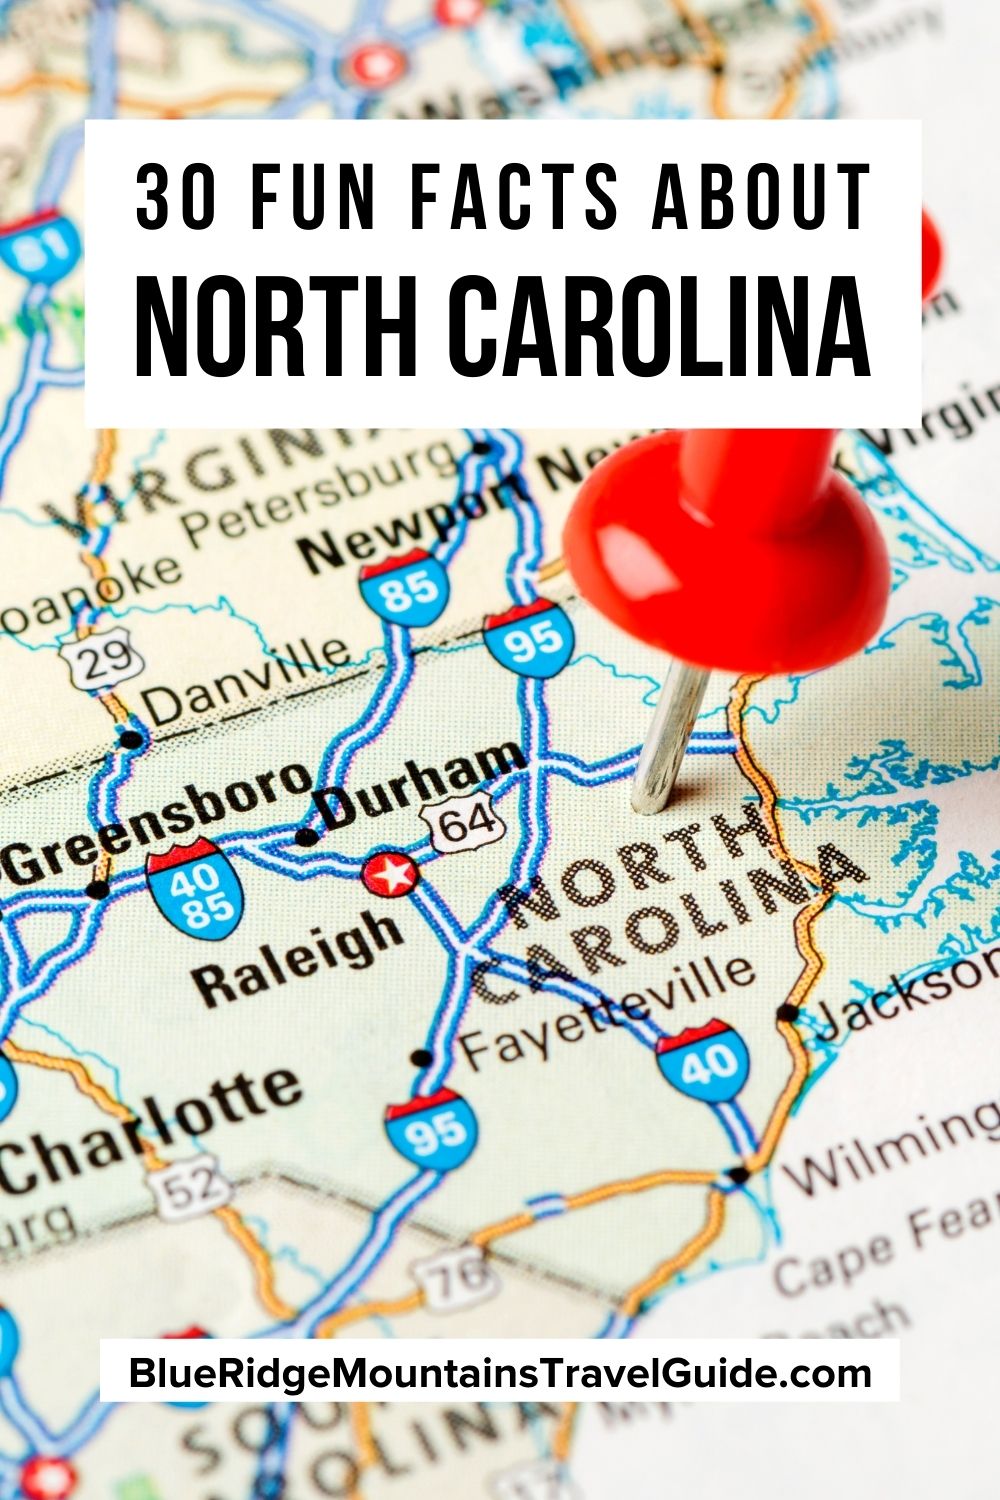 When to Go and Other Fast Facts for Charlotte, North Carolina